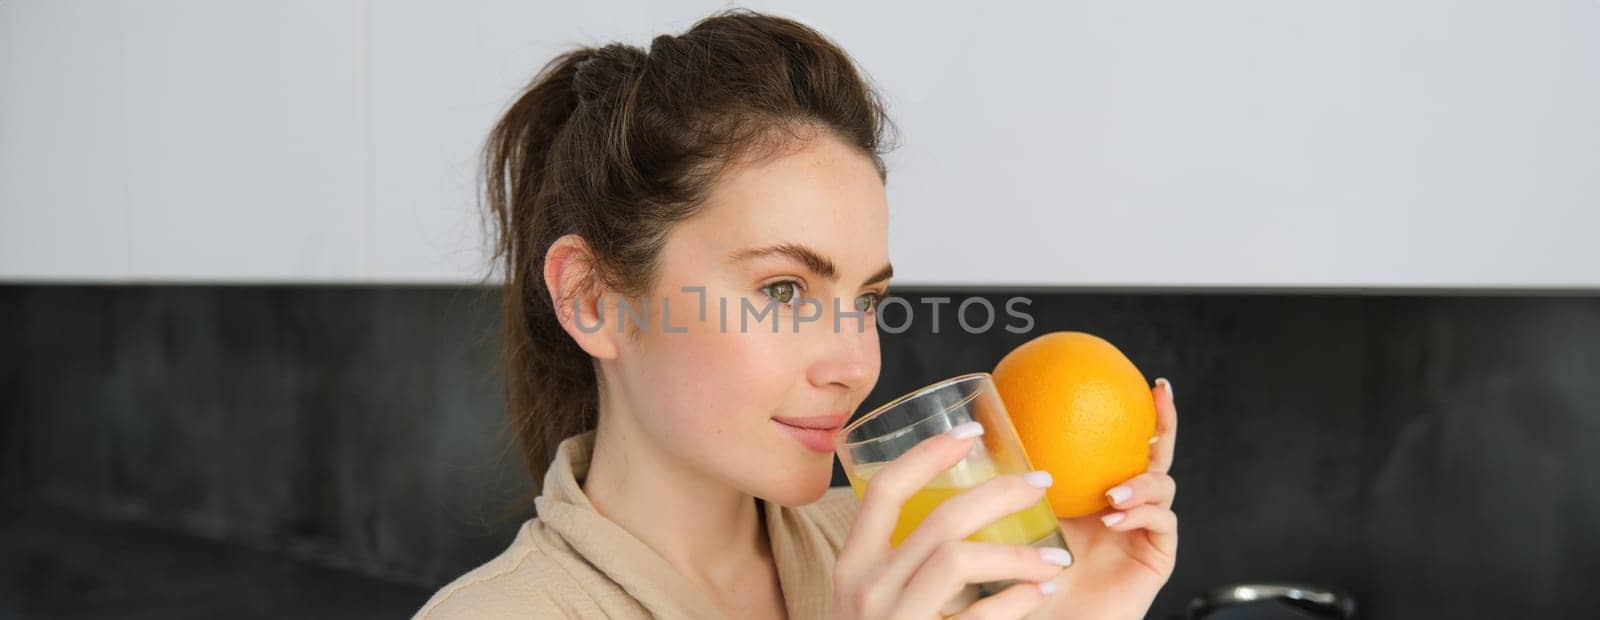 young brunette woman drinking orange juice in white modern kitchen and smiling, girl holding glass of fresh juice, healthy food and drink concept.